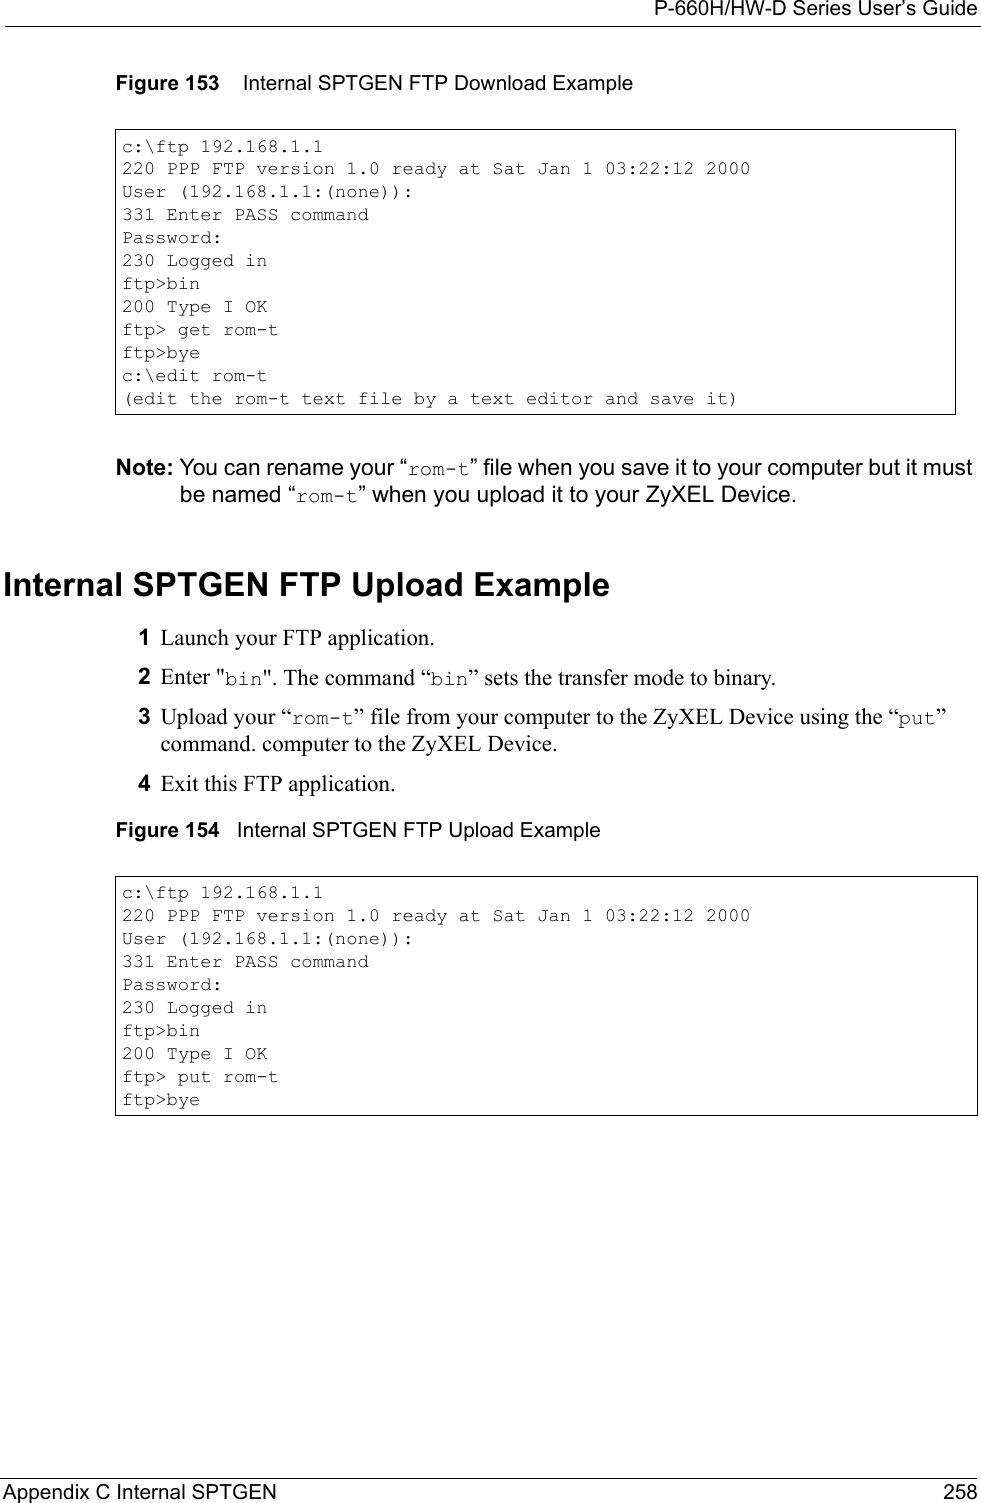 P-660H/HW-D Series User’s GuideAppendix C Internal SPTGEN 258Figure 153    Internal SPTGEN FTP Download ExampleNote: You can rename your “rom-t” file when you save it to your computer but it must be named “rom-t” when you upload it to your ZyXEL Device.Internal SPTGEN FTP Upload Example1Launch your FTP application.2Enter &quot;bin&quot;. The command “bin” sets the transfer mode to binary.3Upload your “rom-t” file from your computer to the ZyXEL Device using the “put” command. computer to the ZyXEL Device.4Exit this FTP application.Figure 154   Internal SPTGEN FTP Upload Examplec:\ftp 192.168.1.1220 PPP FTP version 1.0 ready at Sat Jan 1 03:22:12 2000User (192.168.1.1:(none)):331 Enter PASS commandPassword:230 Logged inftp&gt;bin200 Type I OKftp&gt; get rom-tftp&gt;byec:\edit rom-t(edit the rom-t text file by a text editor and save it)c:\ftp 192.168.1.1220 PPP FTP version 1.0 ready at Sat Jan 1 03:22:12 2000User (192.168.1.1:(none)):331 Enter PASS commandPassword:230 Logged inftp&gt;bin200 Type I OKftp&gt; put rom-tftp&gt;bye